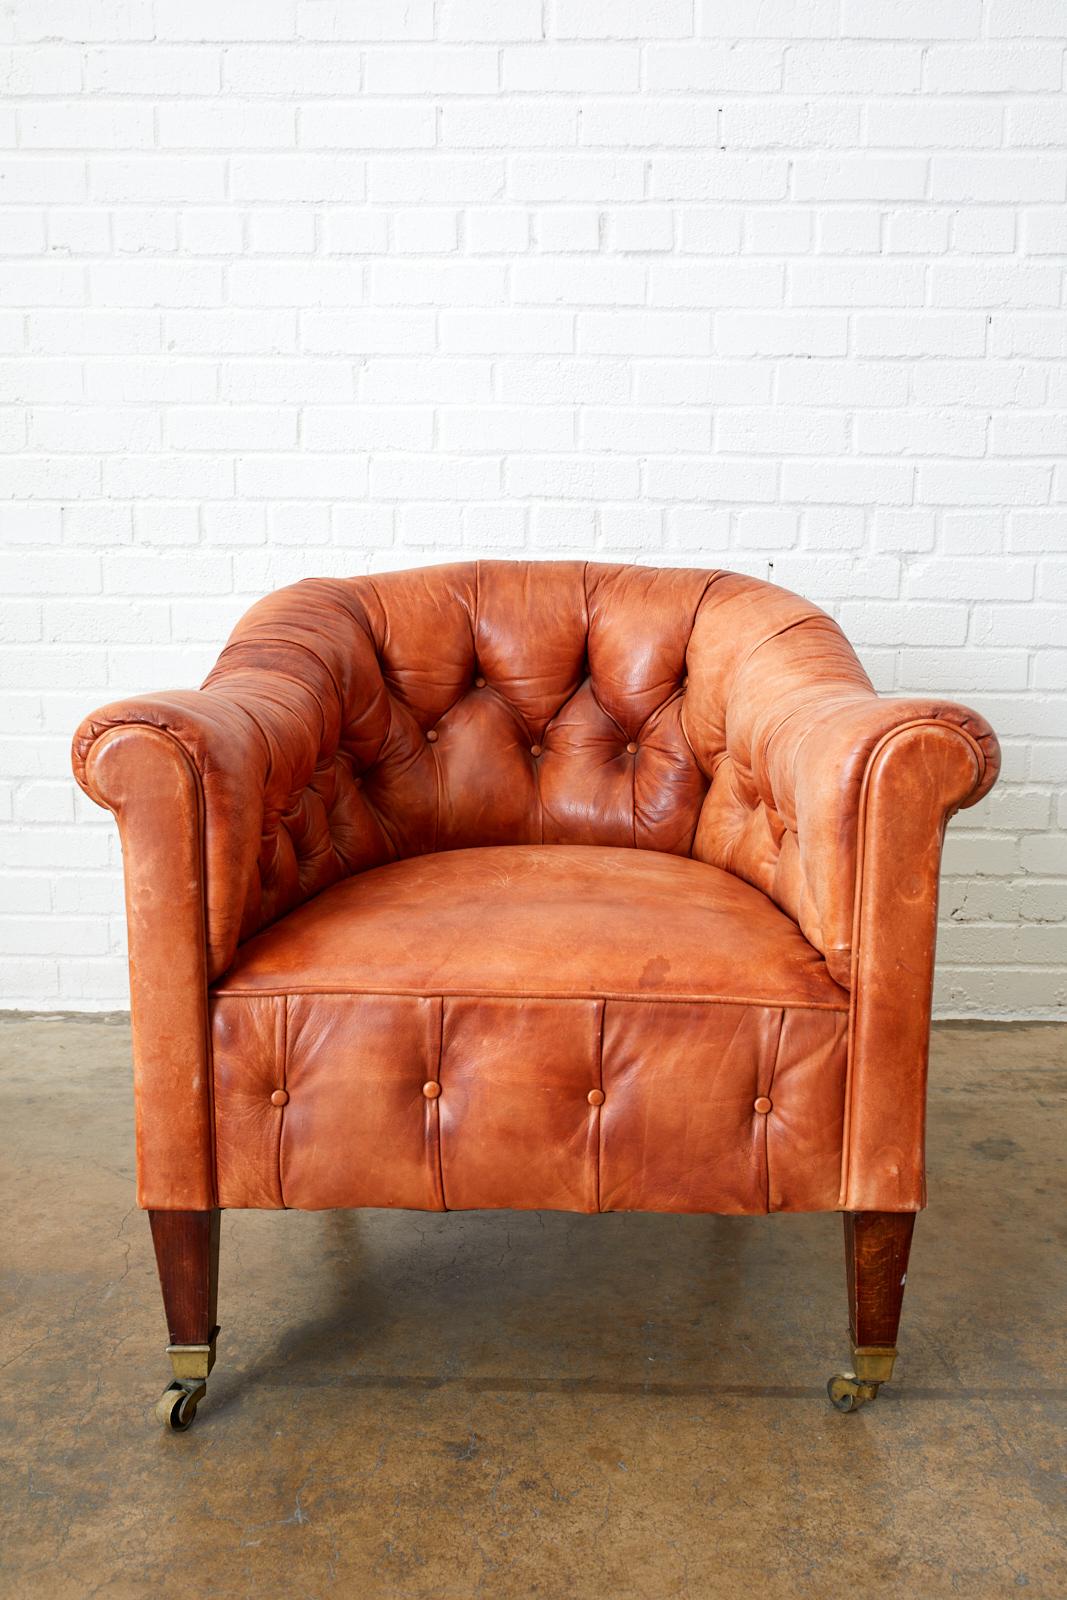 Spectacular pair of English leather Chesterfield style club chairs or tub chairs. Featuring a beautifully aged and faded tufted leather upholstery. Rich, supple cigar leather that has faded into different stages of light saddle color. Large generous